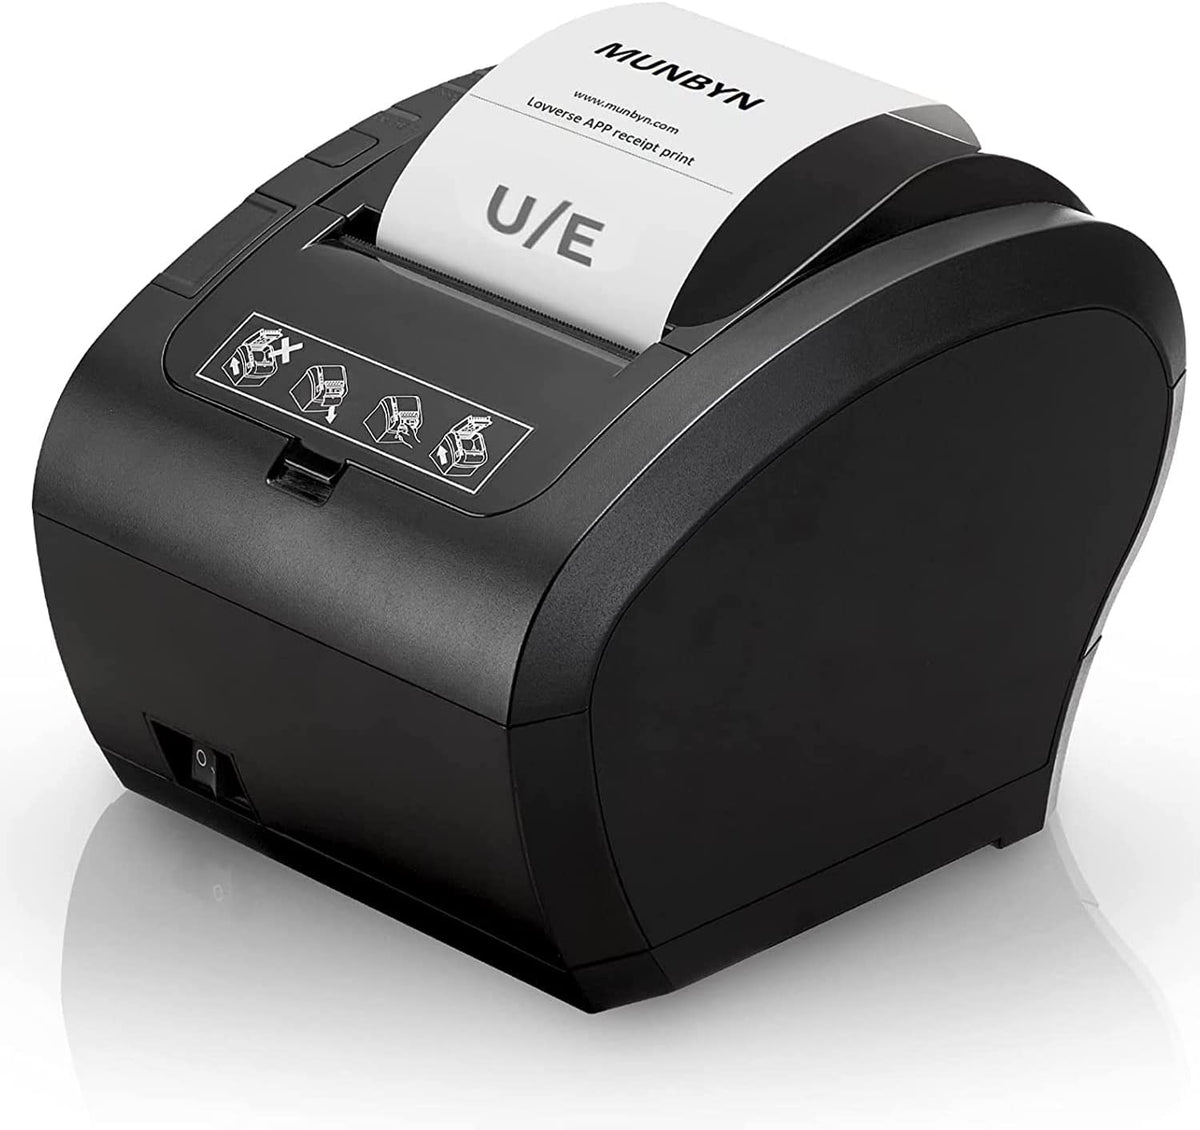 MUNBYN Receipt Printer 80mm with USB Ethernet Port, Thermal POS Printer with Auto Cutter for Restaurant Kitchen Shop Home Business, Support ESC/POS,Mac Windows Linux Chrome OS,Cash Drawer